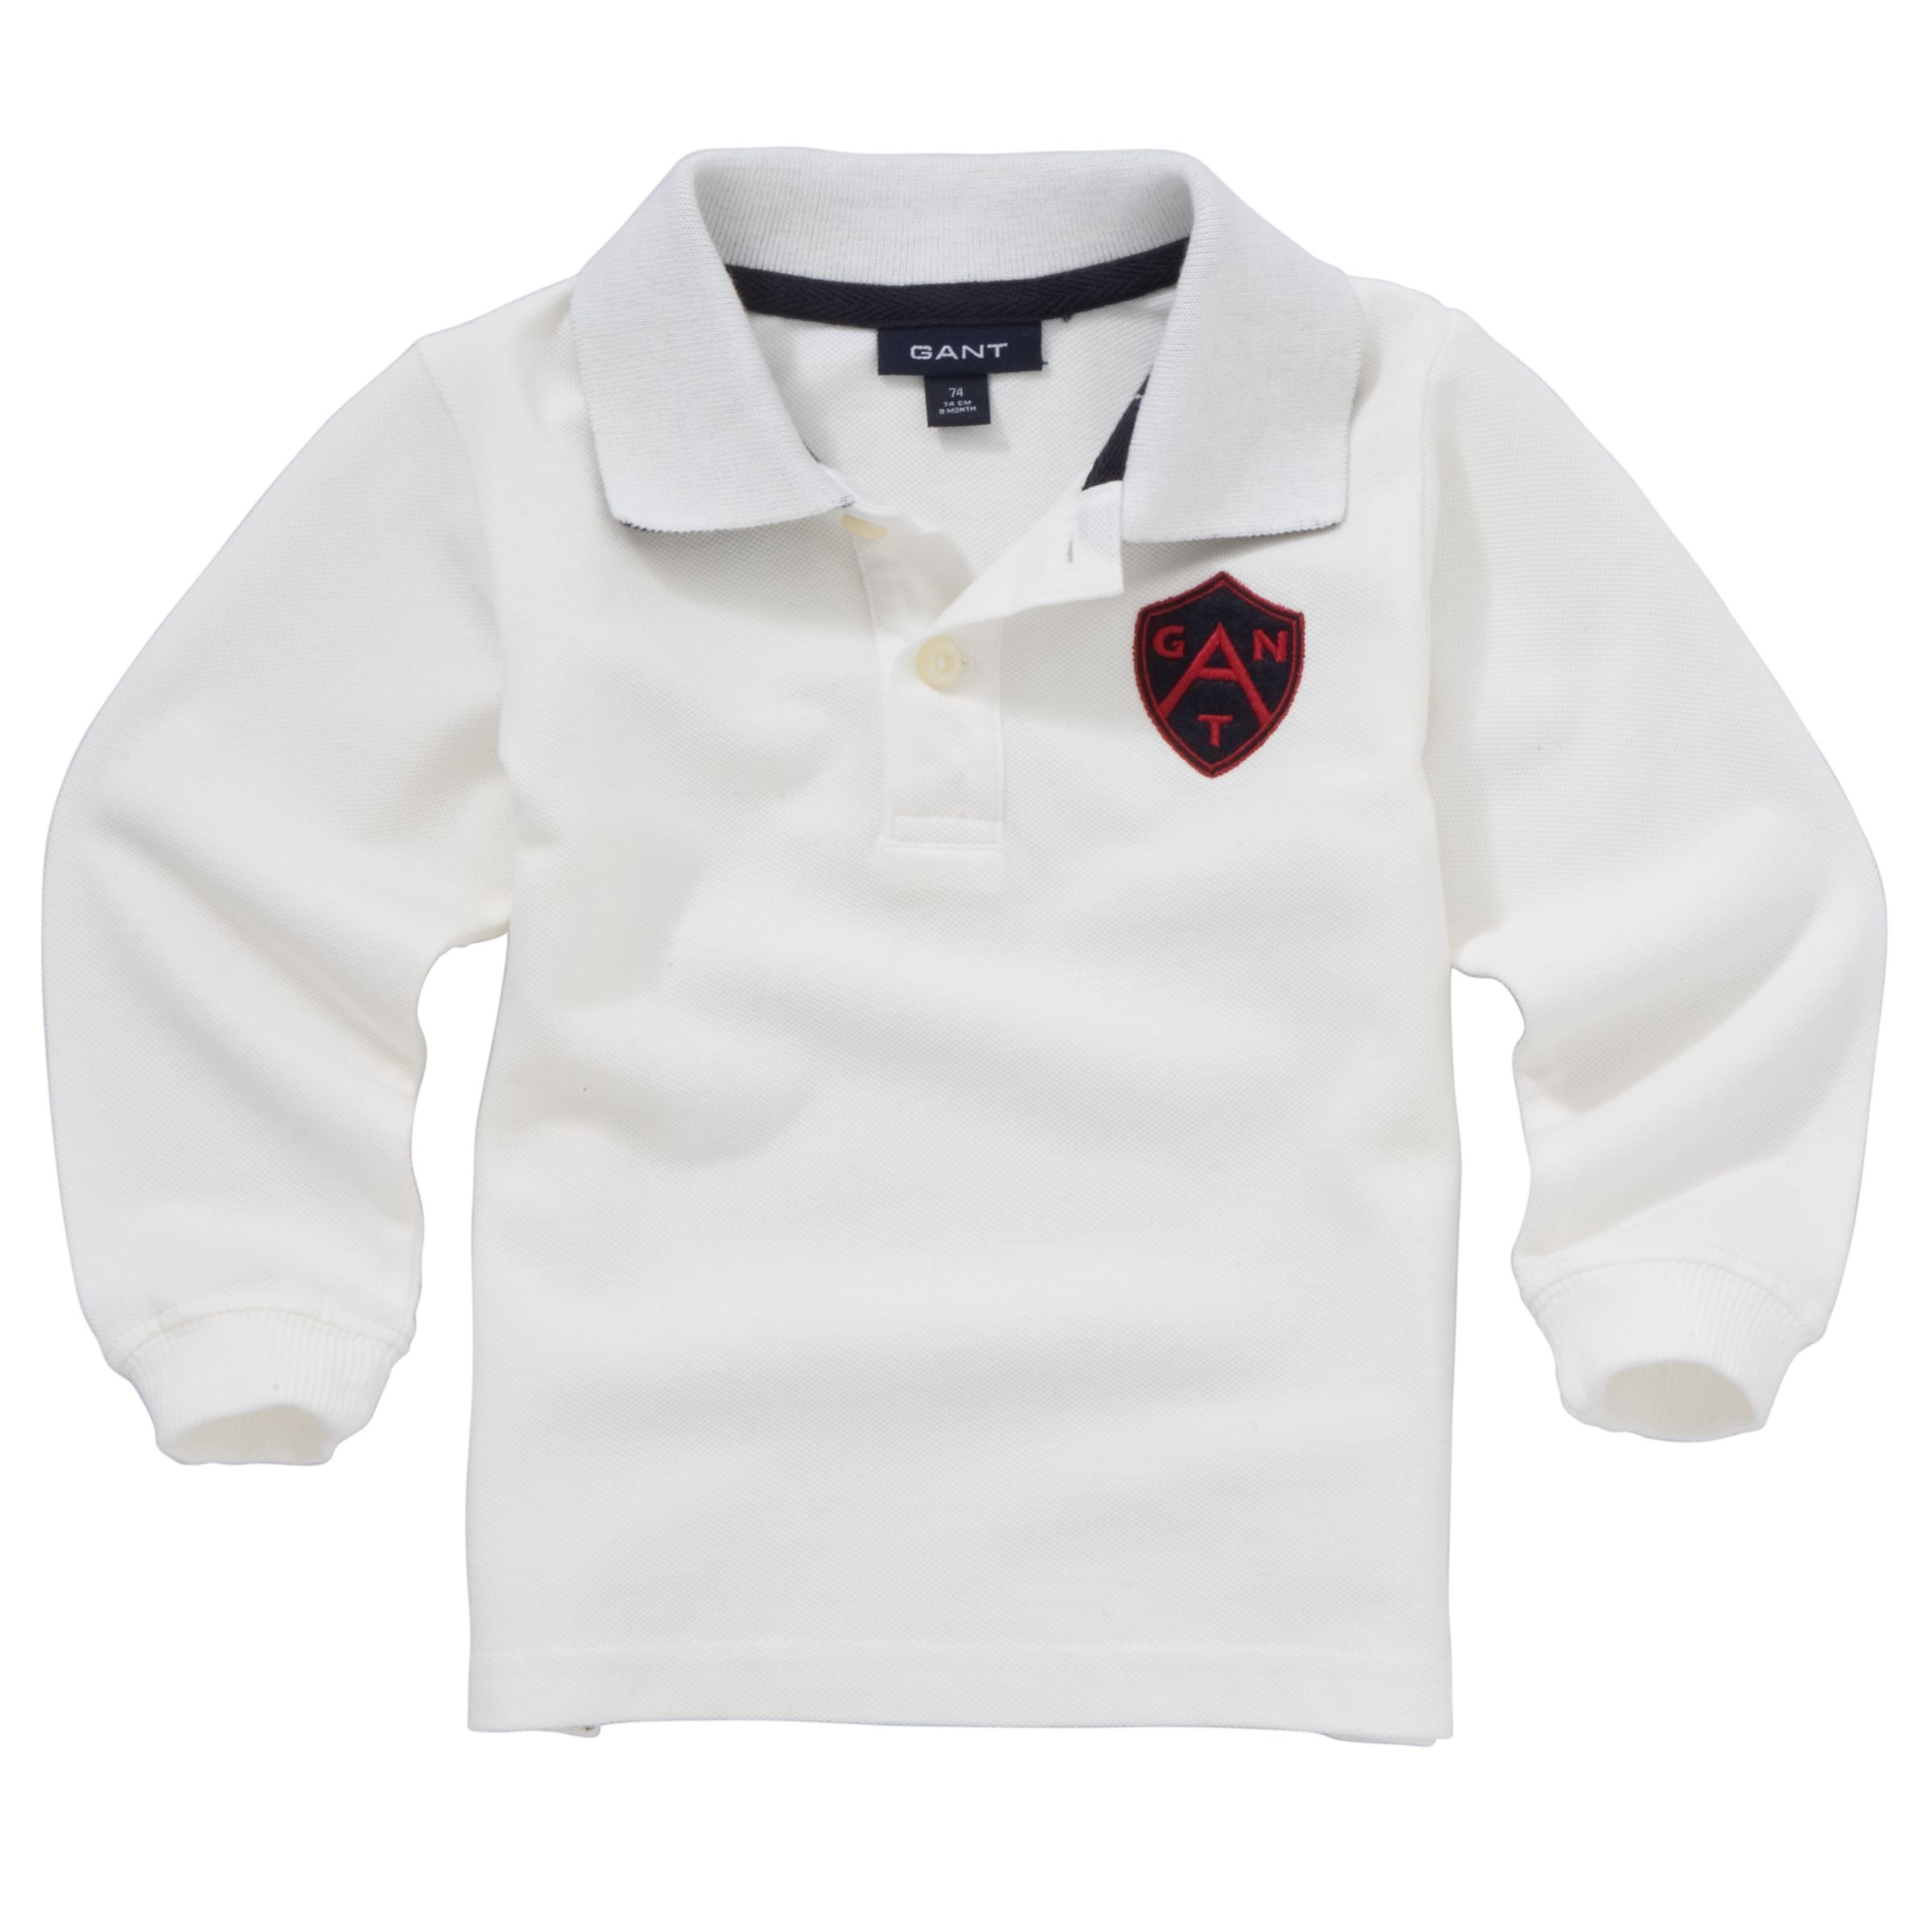 Gant Patch Pique Long Sleeve Rugby Shirt, Off